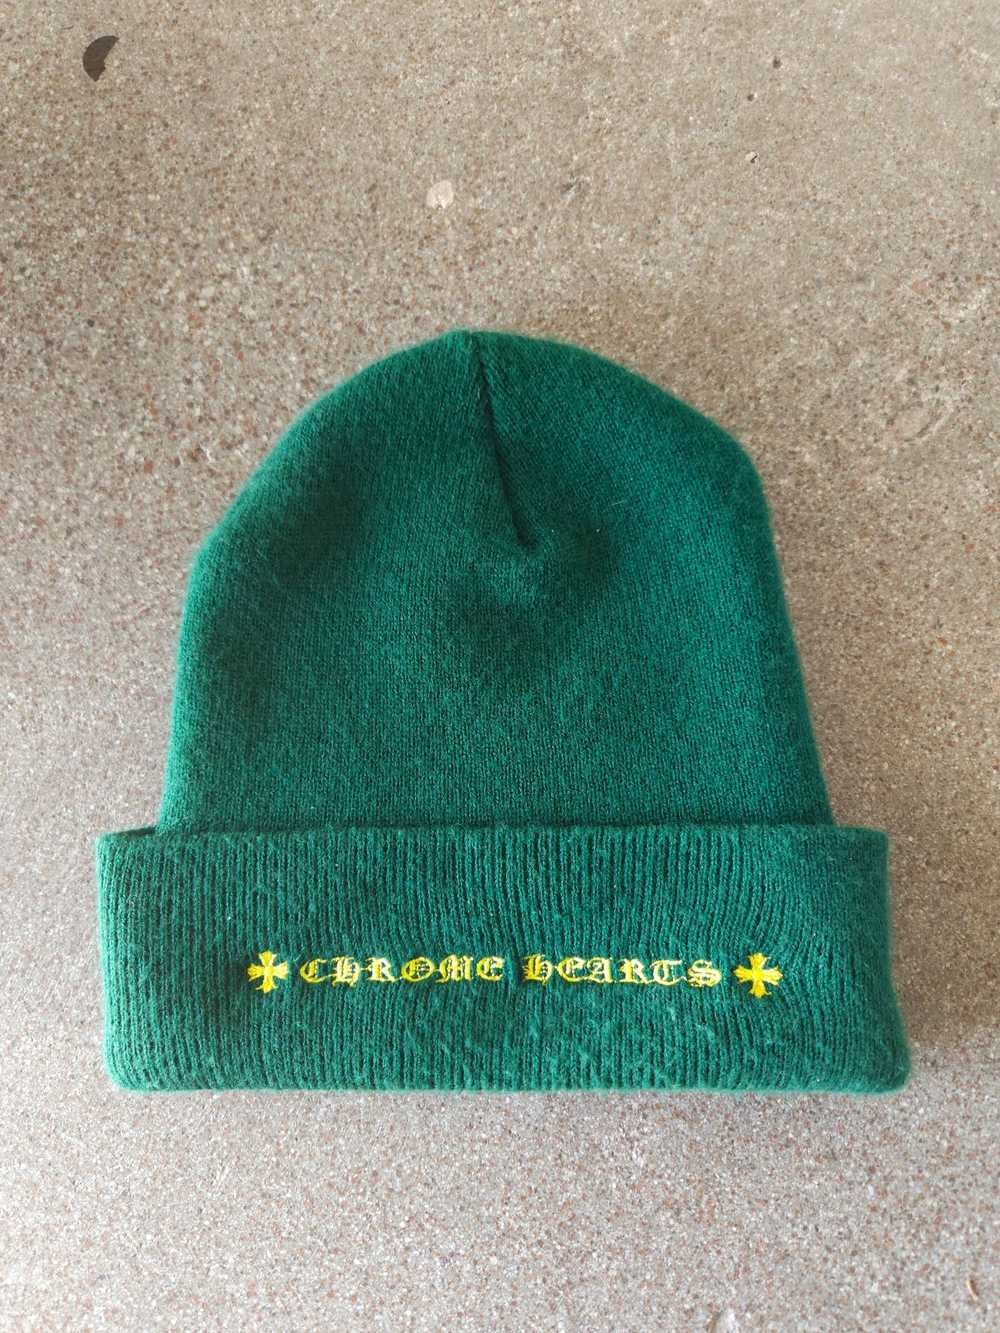 Chrome Hearts Embroidered SPEC Logo Beanie - image 2